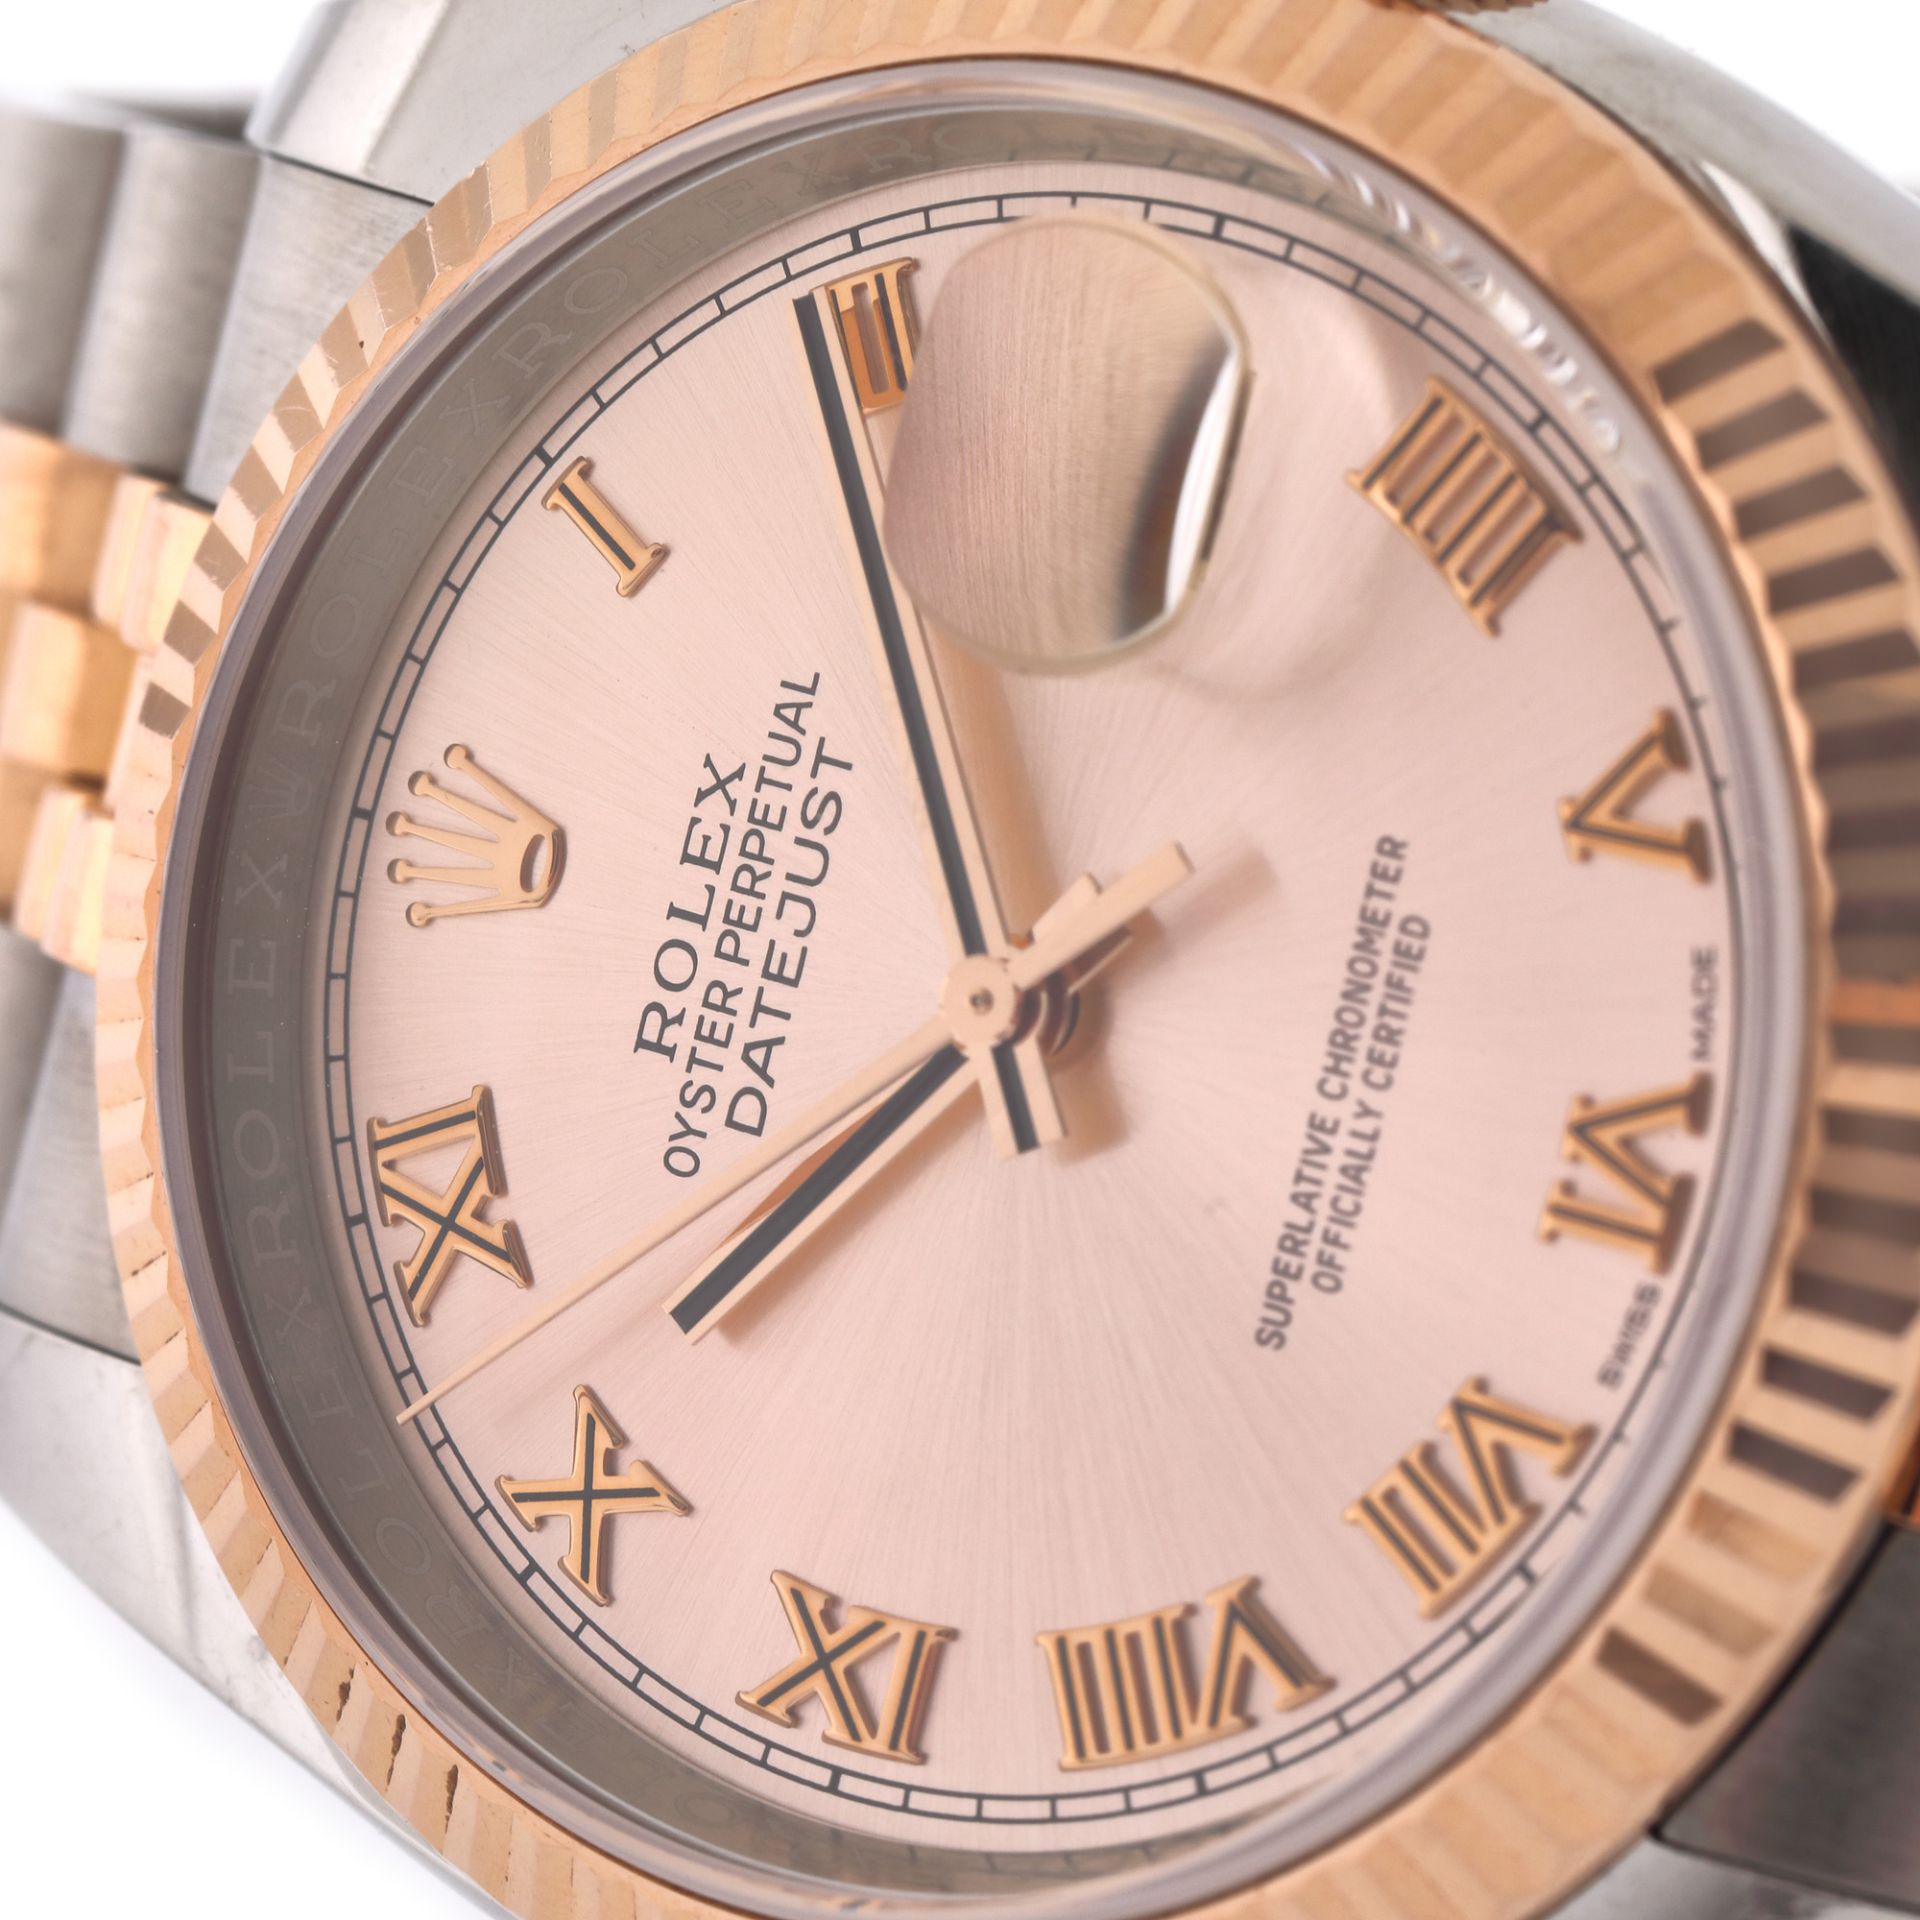 Rolex Datejust wristwatch, gold and steel, women - Image 2 of 3